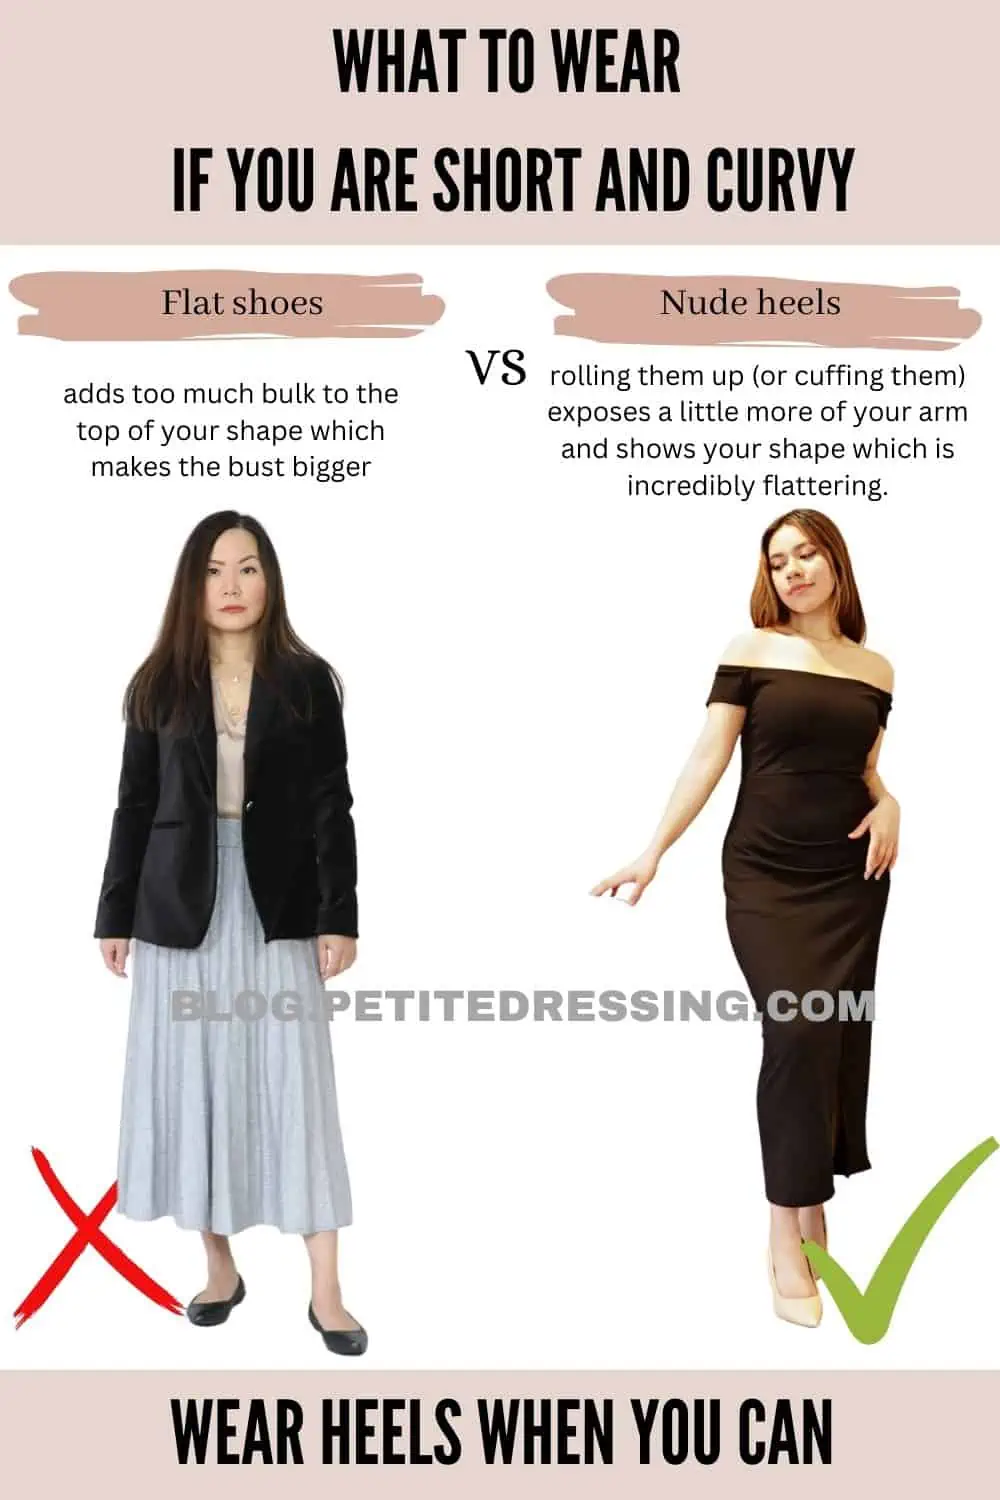 How to dress if you're short in height (petite) and curvy